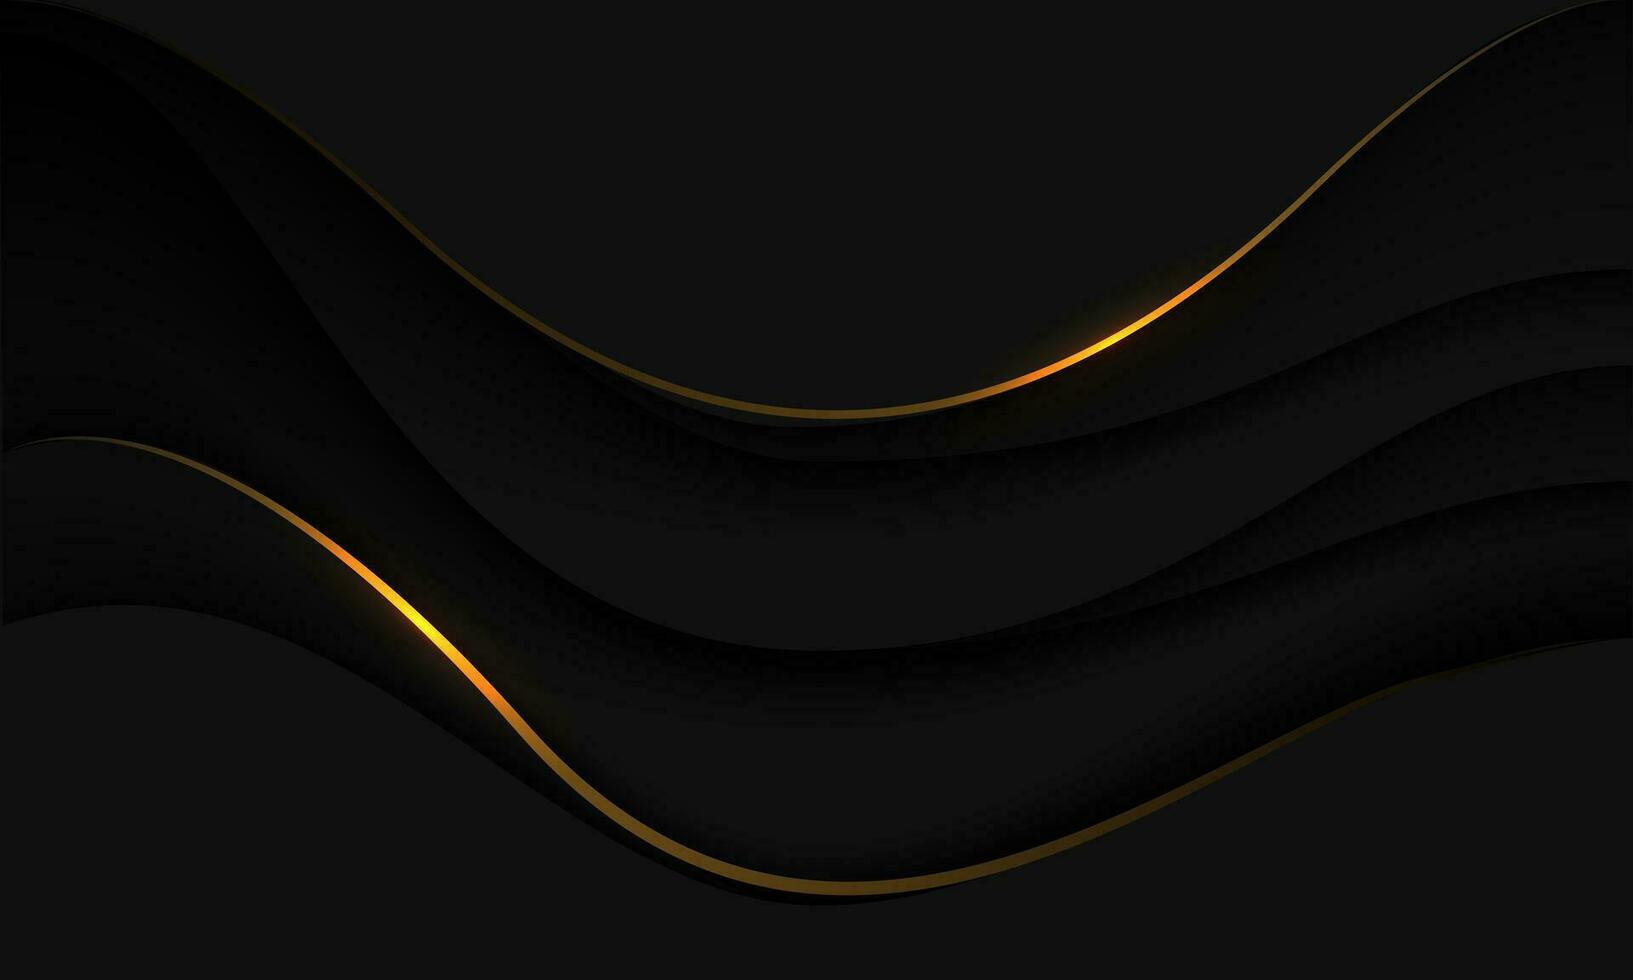 Abstract gold line curve on black shadow overlap design modern futuristic luxury creative background vector